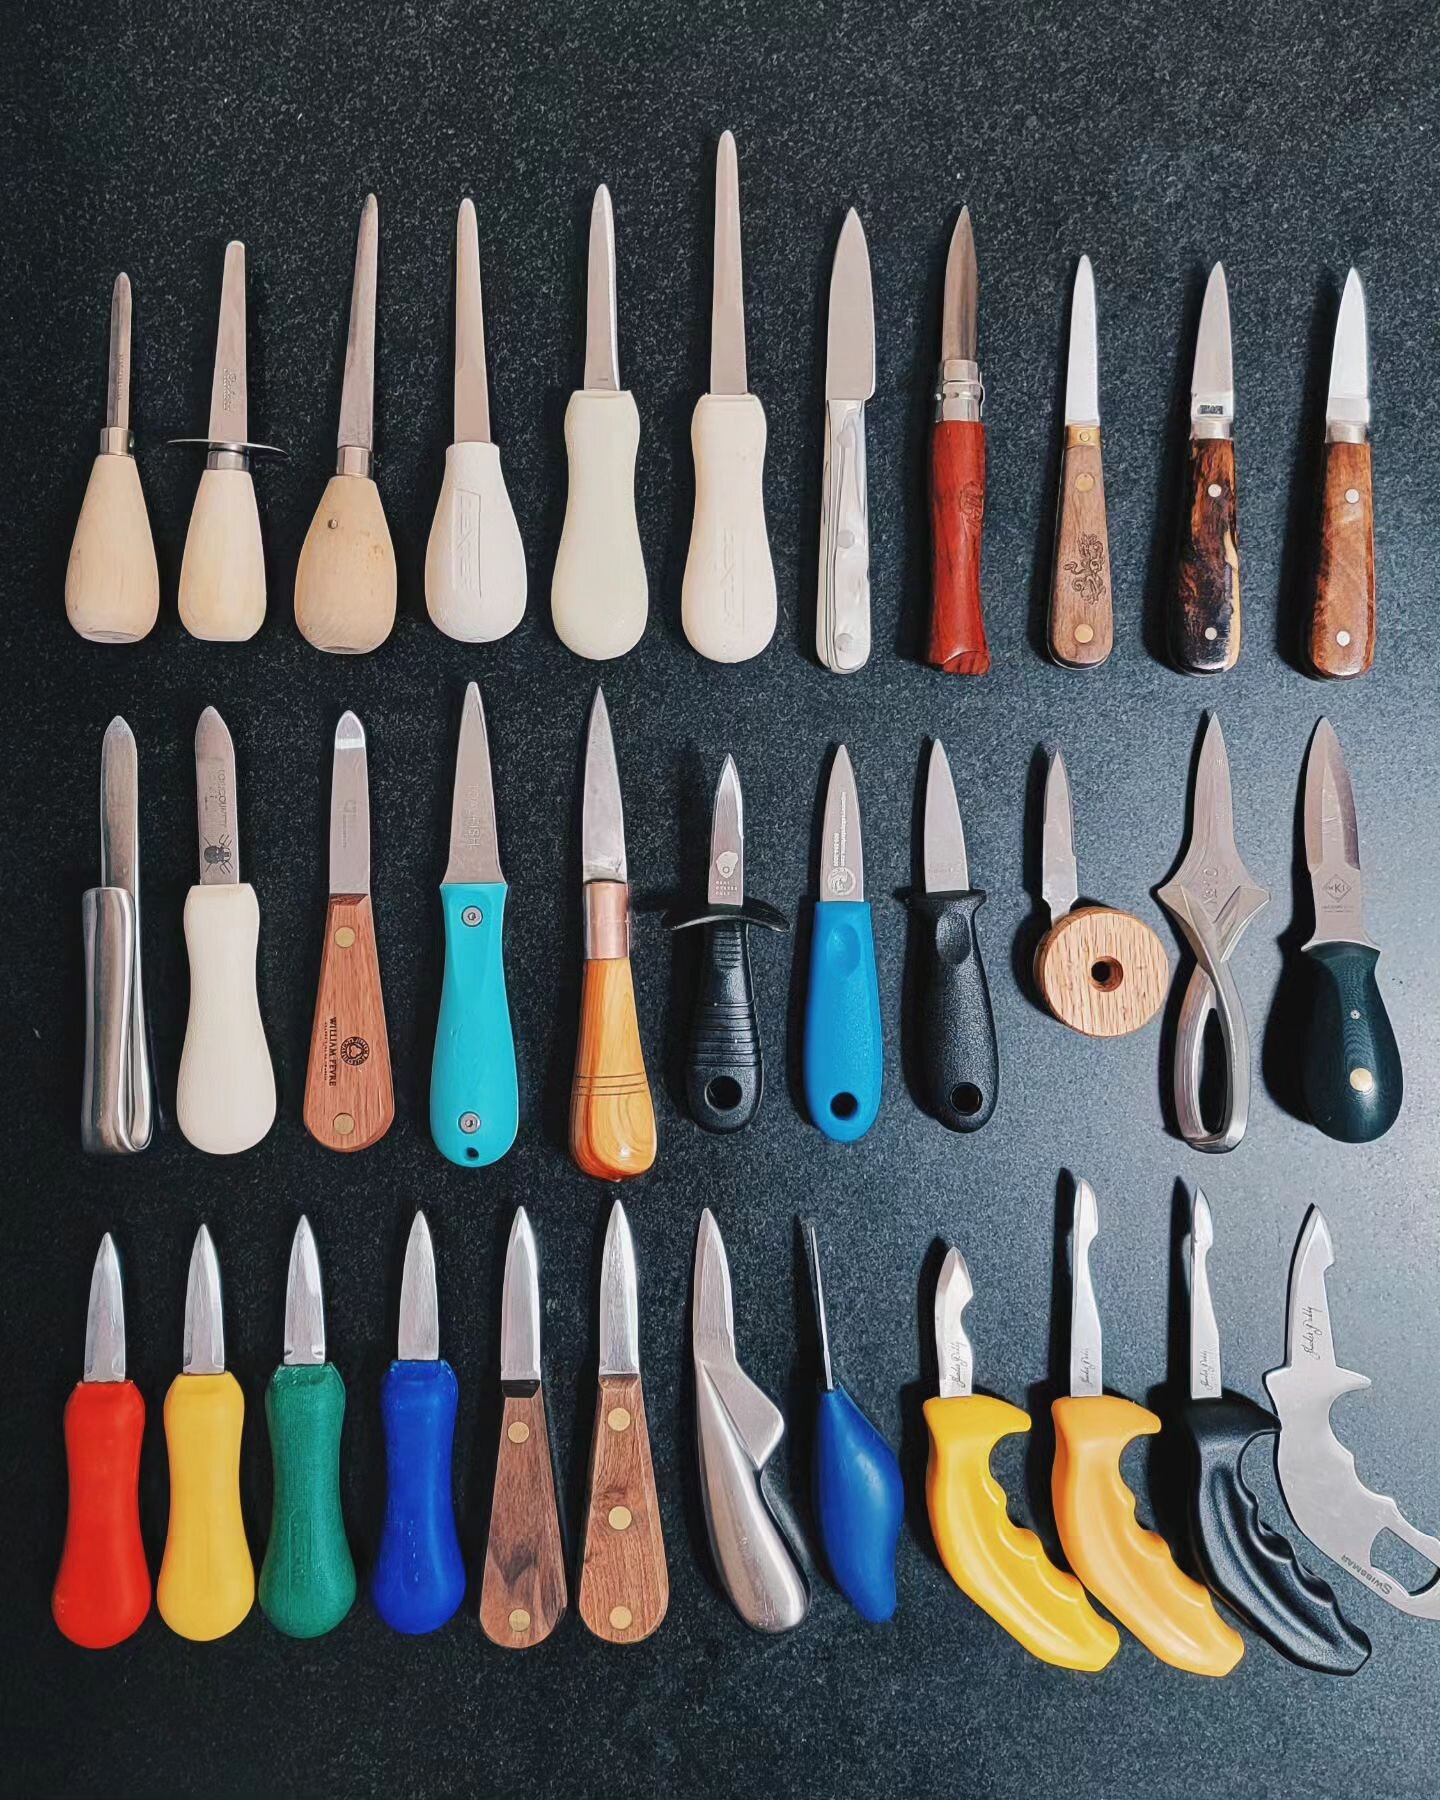 I never intended on collecting oyster knives, but here we are. Some highlights of the beautiful blades that I've accumulated over the years. Most of these were gifts from knife makers, oyster farms, and chefs. Can you spot the ones that you've given 